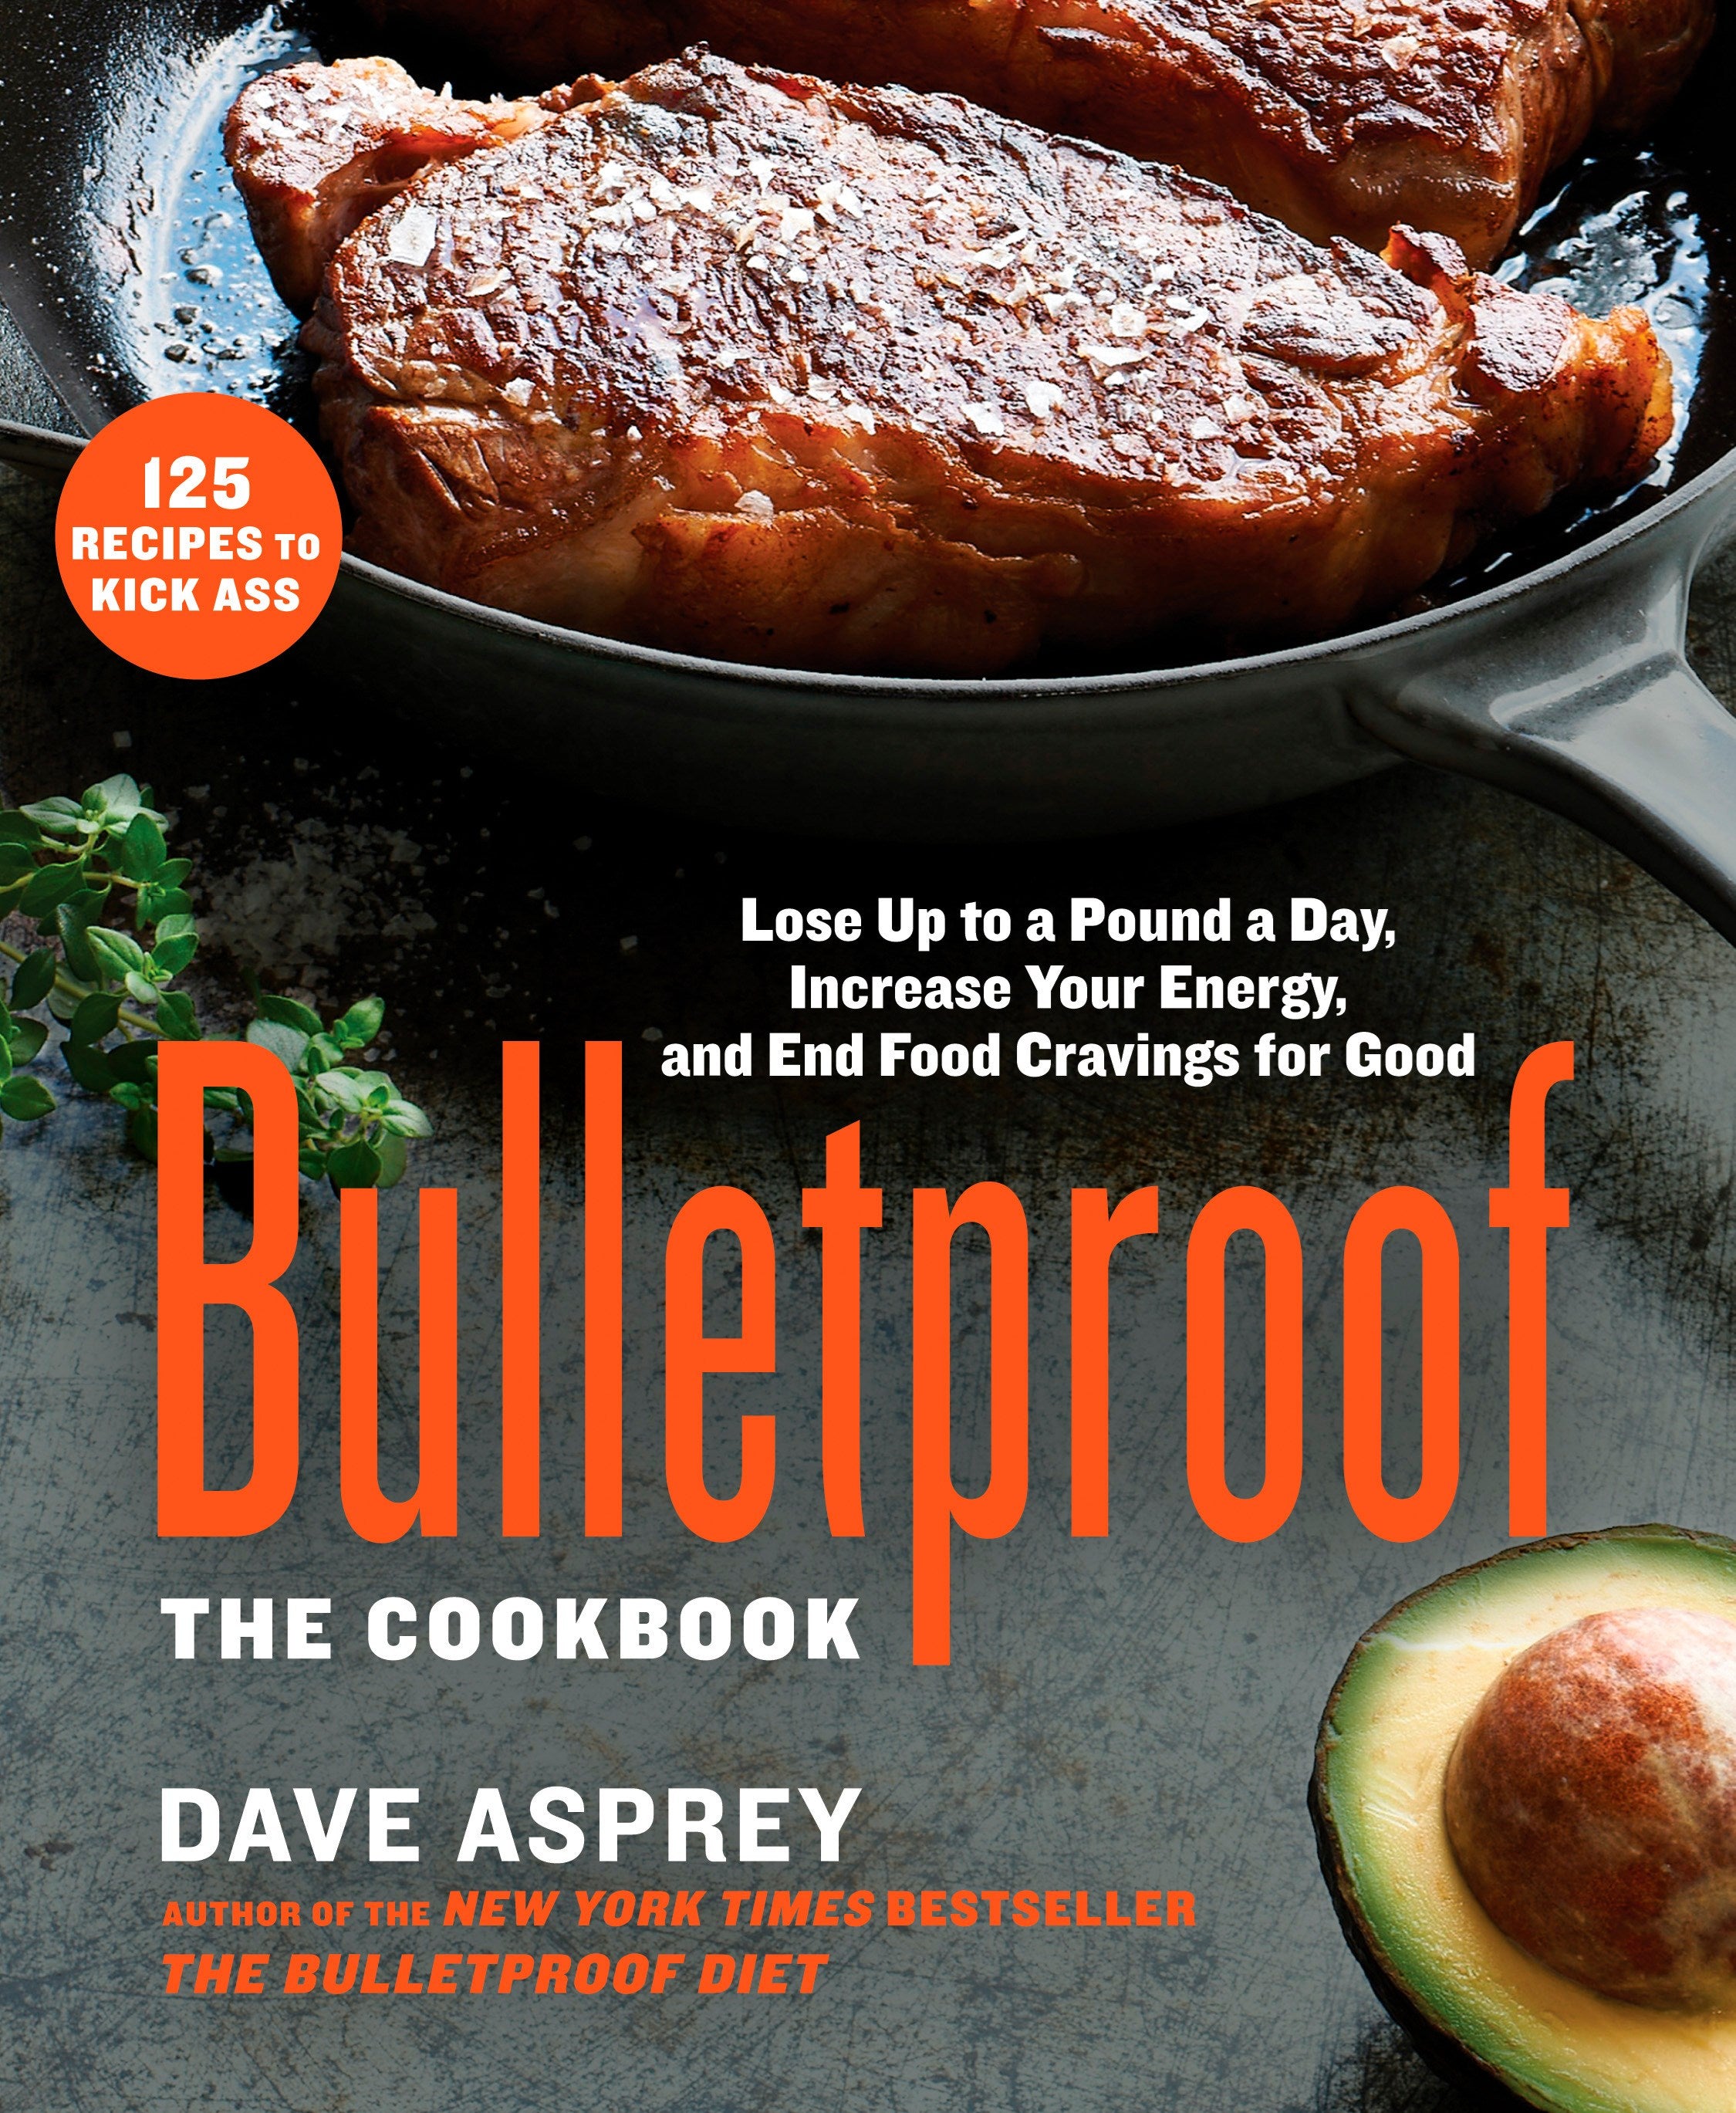 Bulletproof: The Cookbook : Lose Up to a Pound a Day, Increase Your Energy, and End Food Cravings for Good